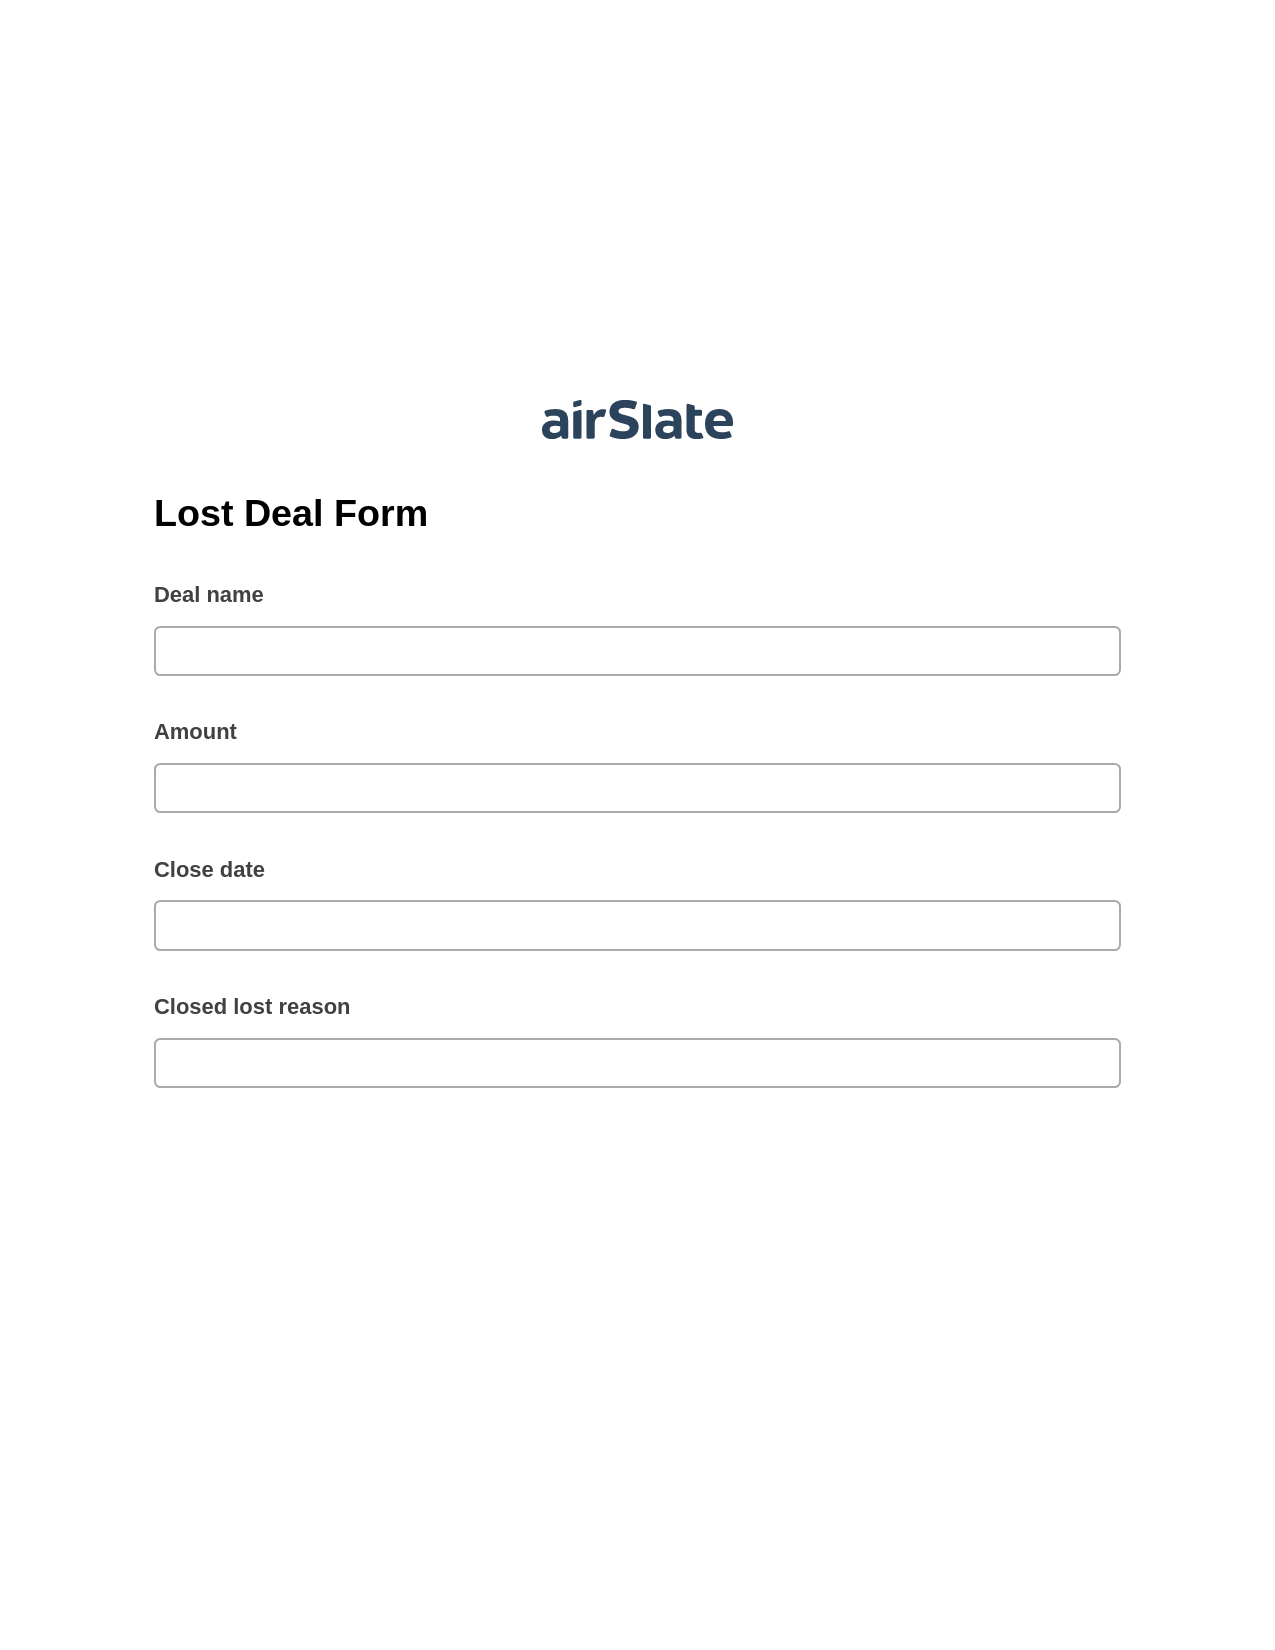 Multirole Lost Deal Form Pre-fill from CSV File Bot, Add Tags to Slate Bot, Export to NetSuite Bot